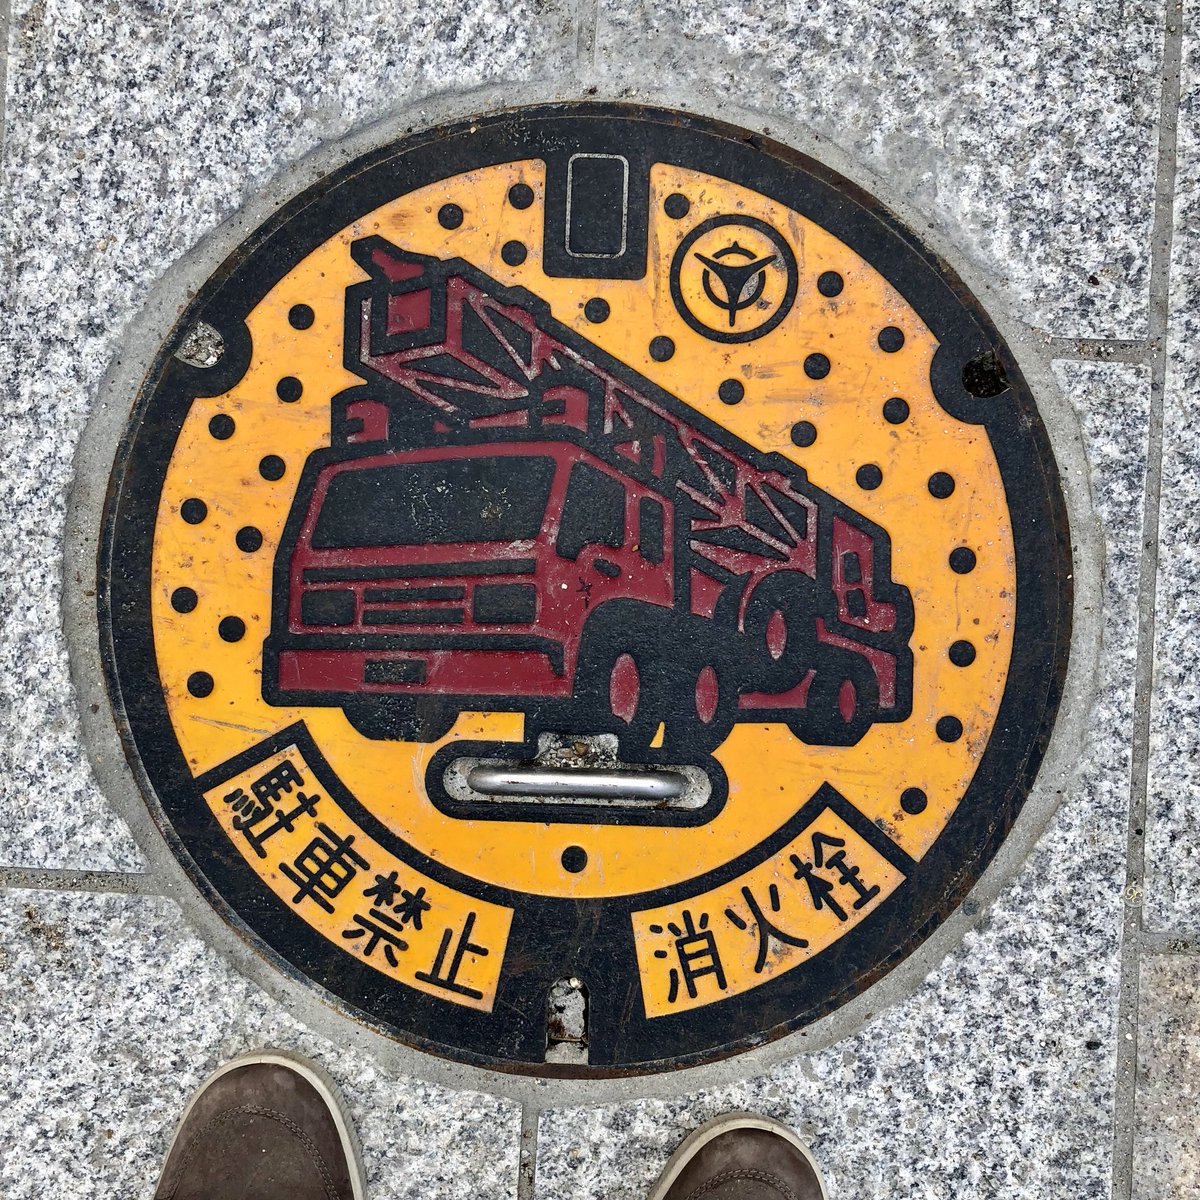 Manhole covers from Uji